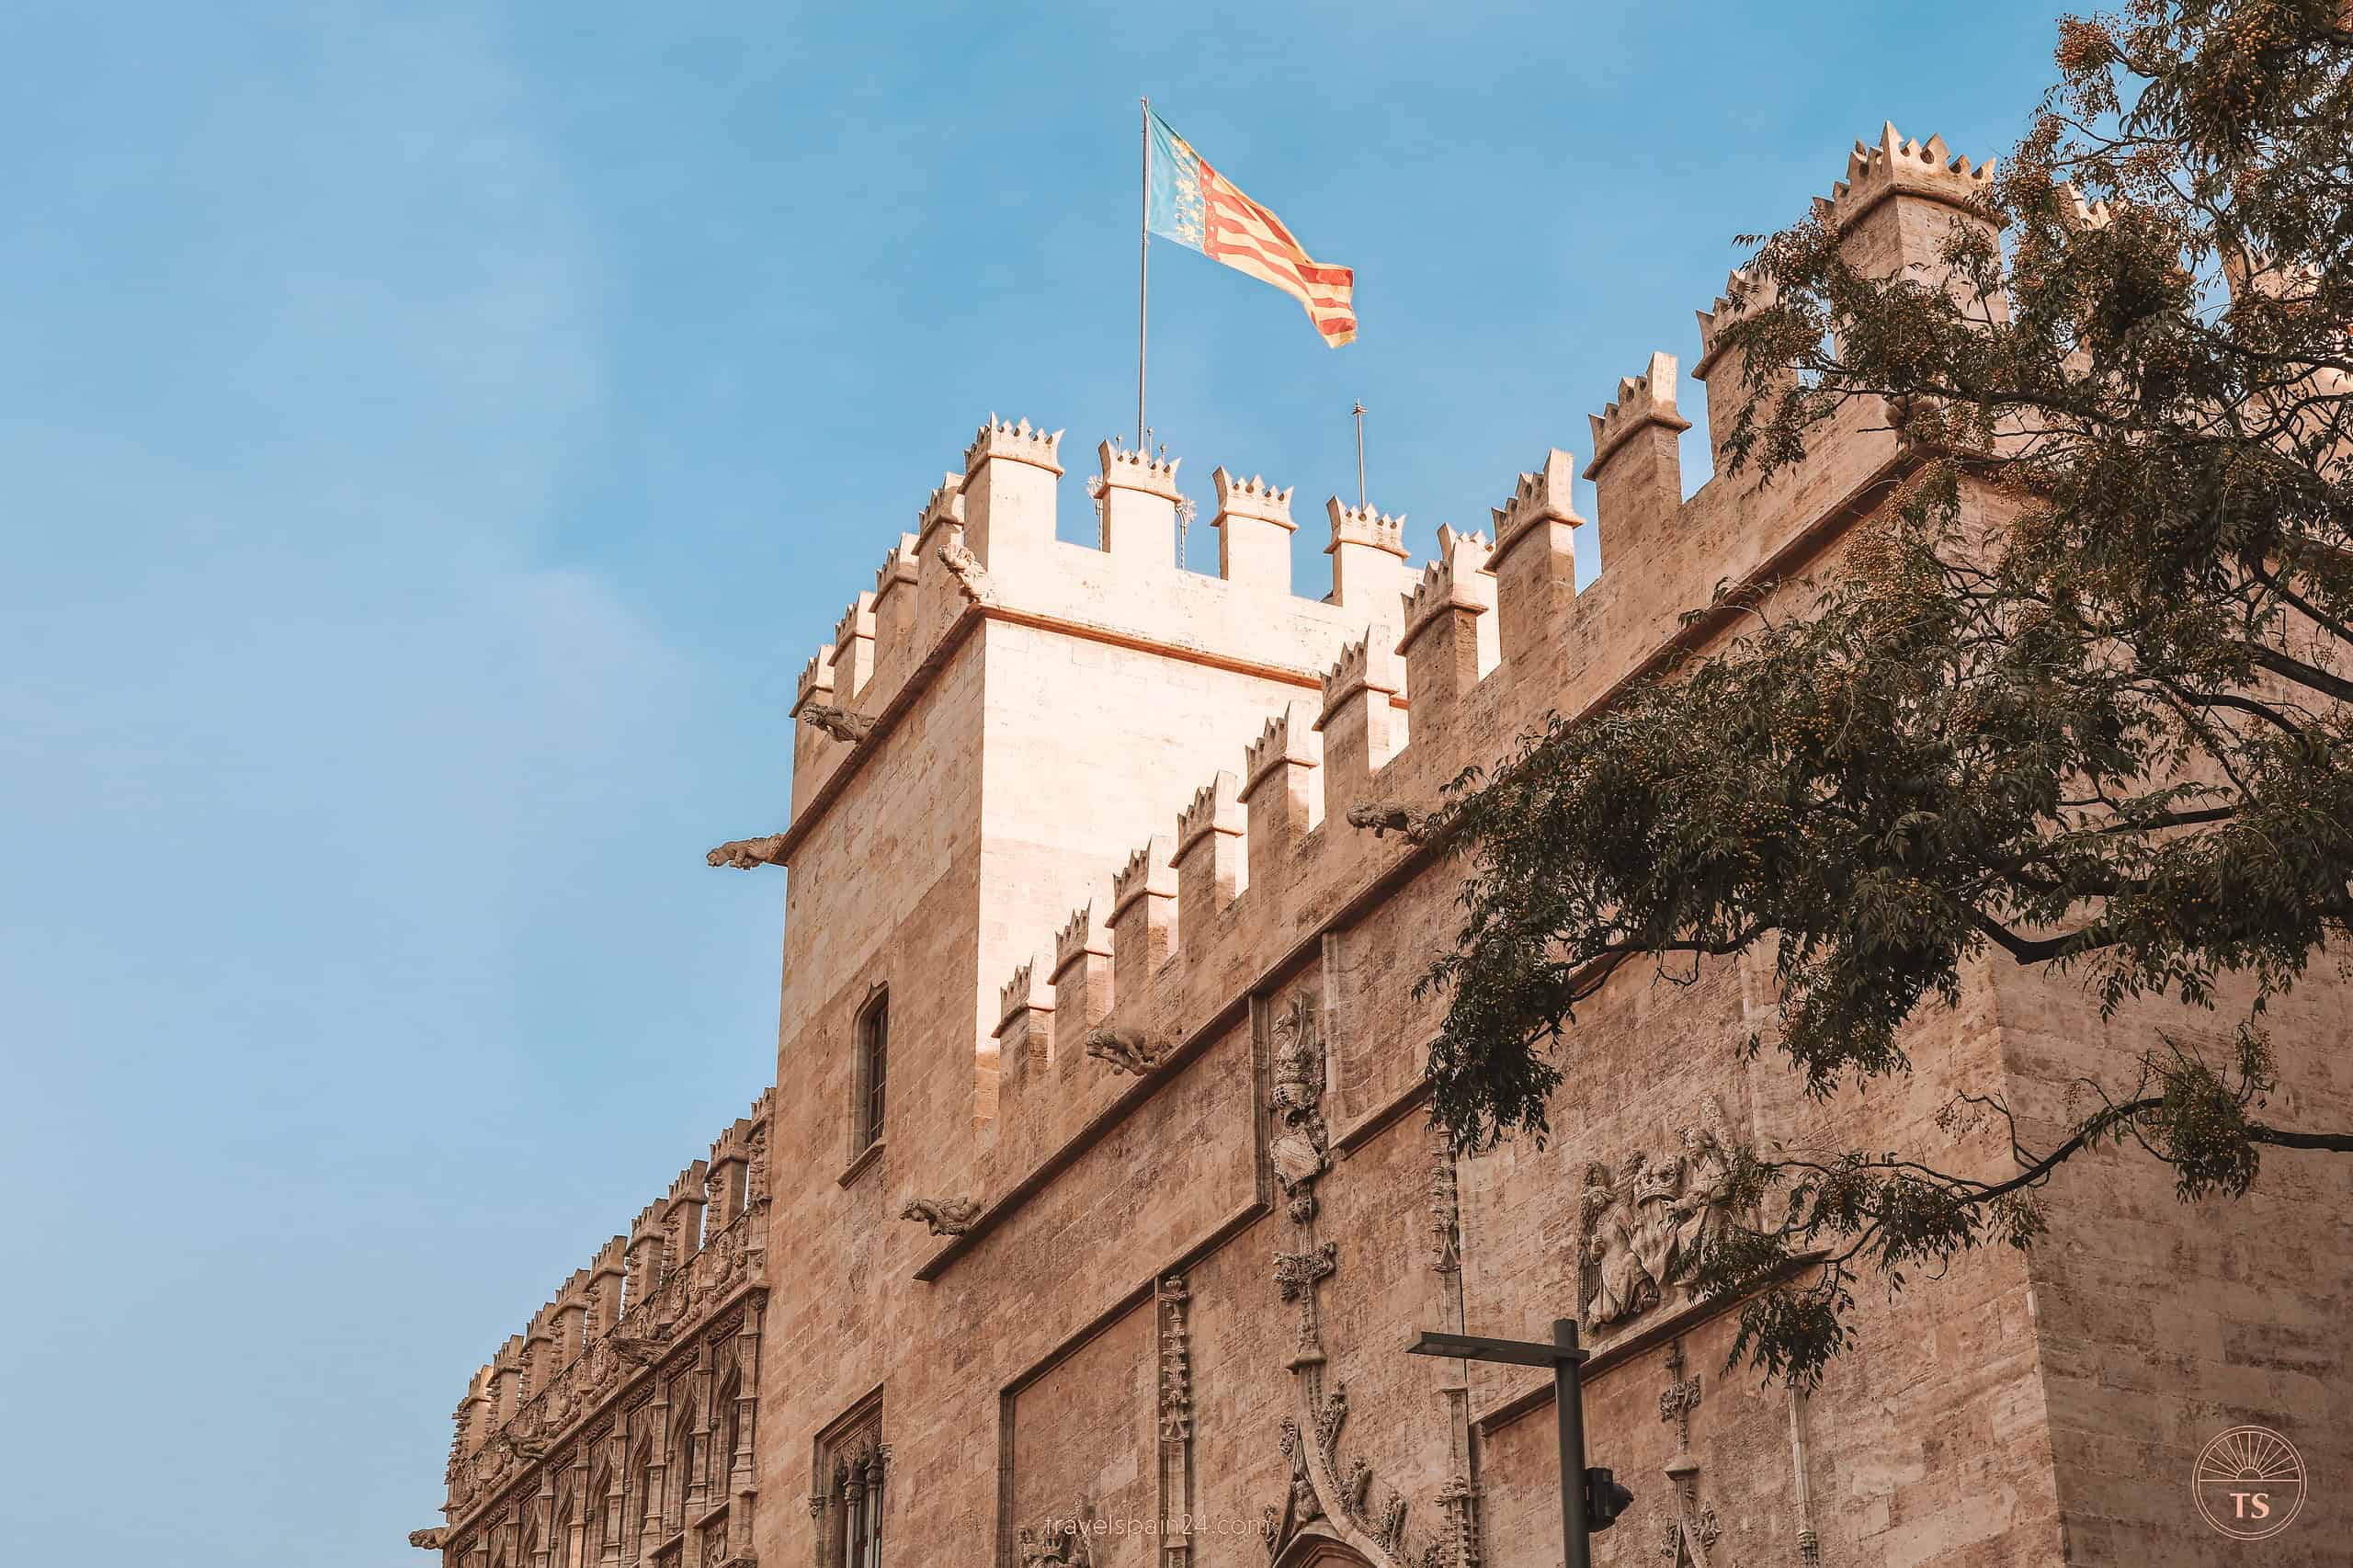 Front view of the iconic tower at La Lonja de la Seda in Valencia, with the Valencian flag proudly displayed on top, set against a bright blue sky